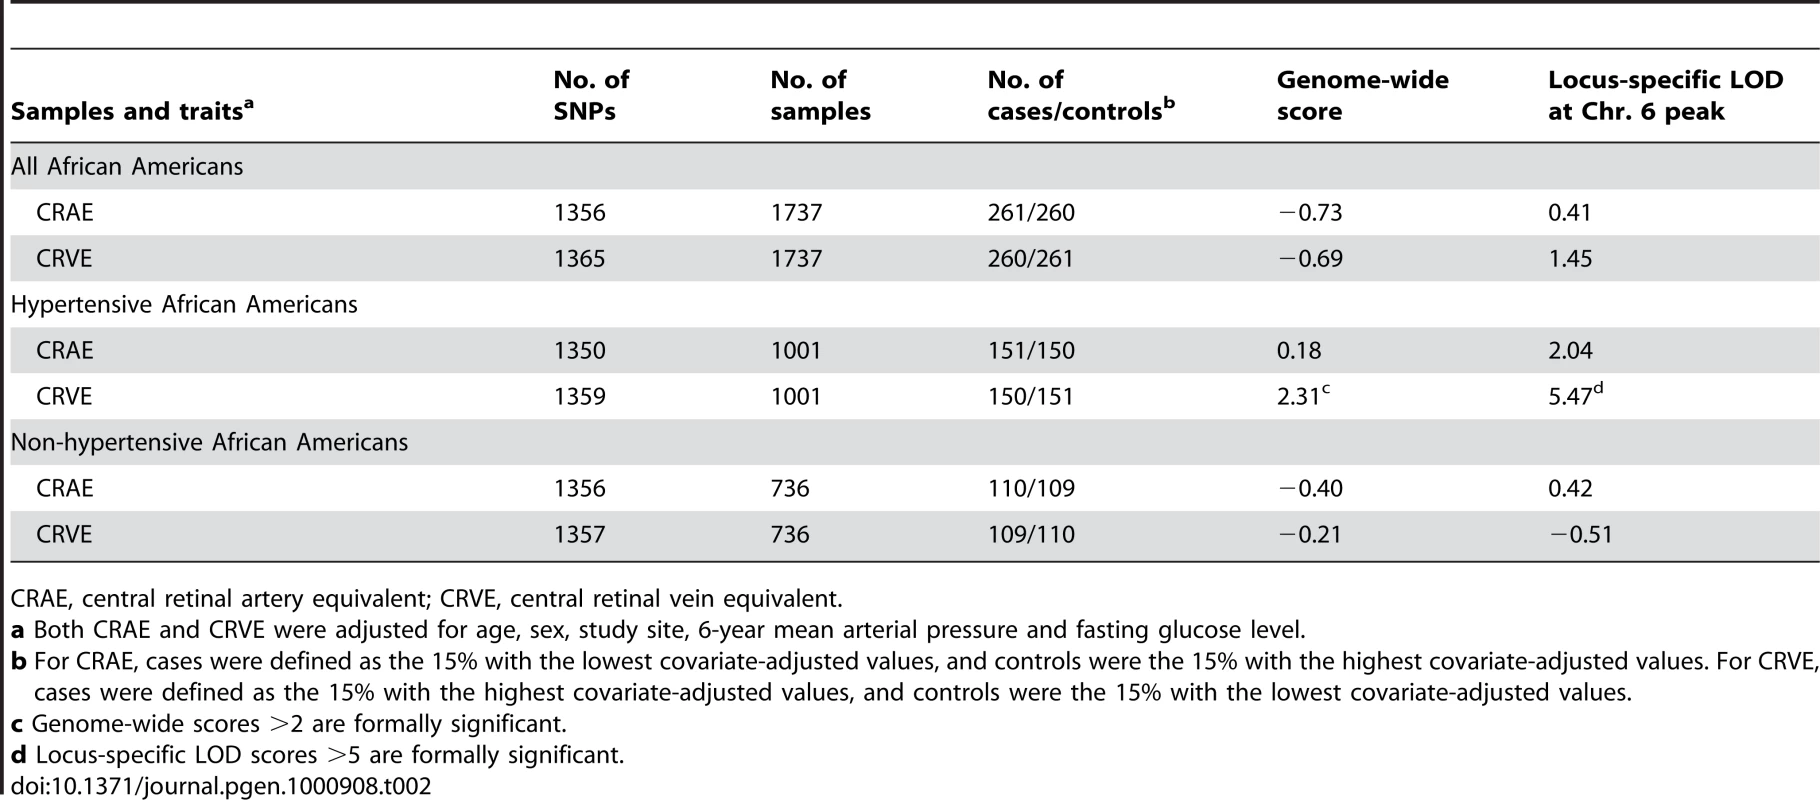 Summary of locus-specific scores from the admixture scans of retinal vascular caliber.